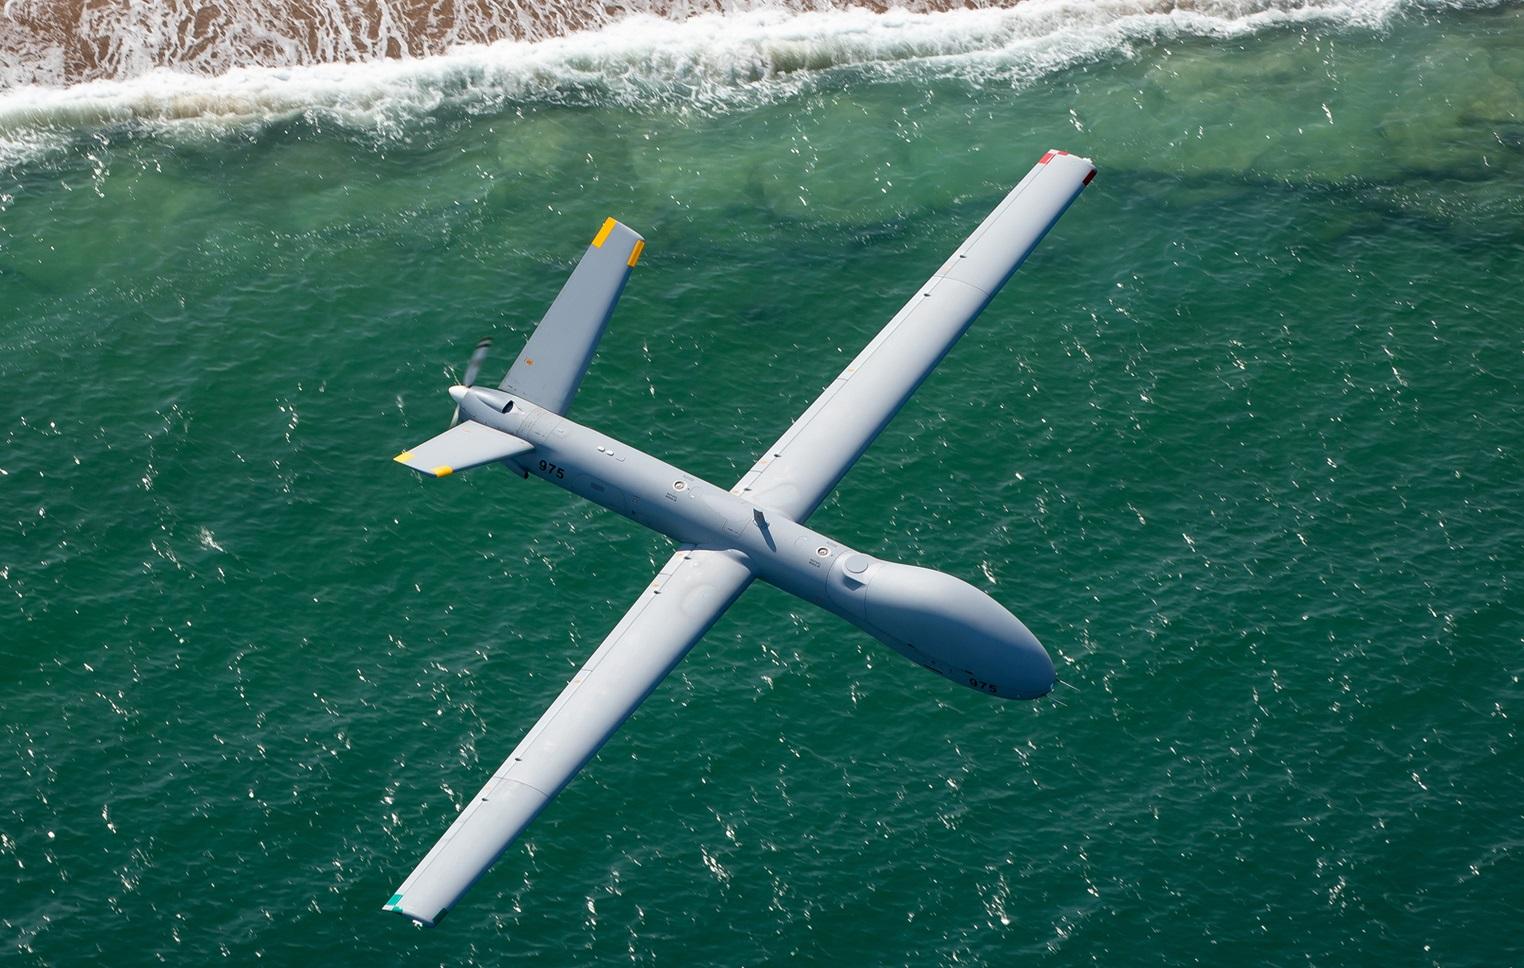 Elbit System’s Hermes 900 Unmanned Aerial Vehicle